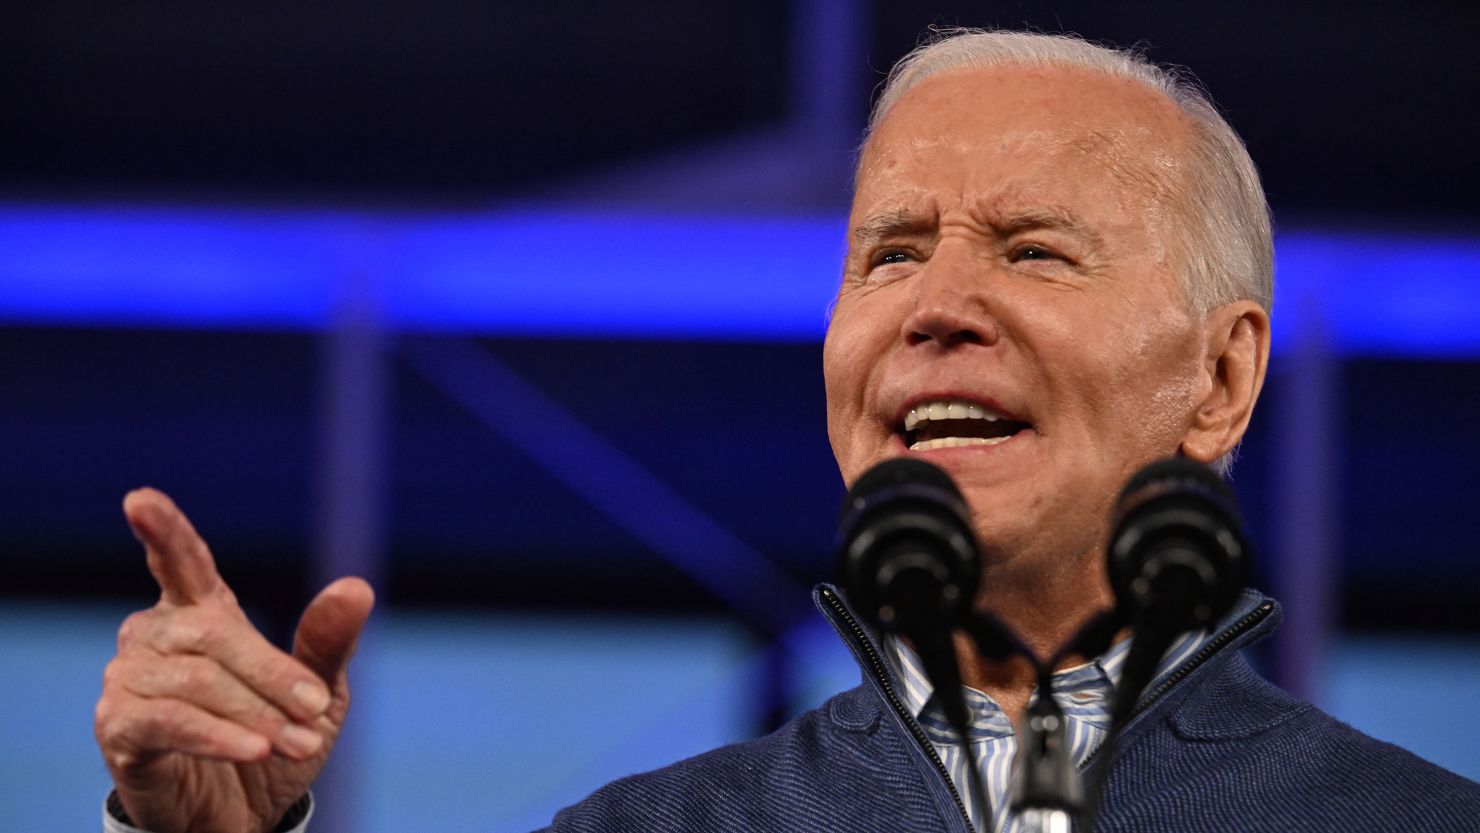 US President Joe Biden speaks at a campaign event in Wallingford, Pennsylvania, on March 8, 2024.